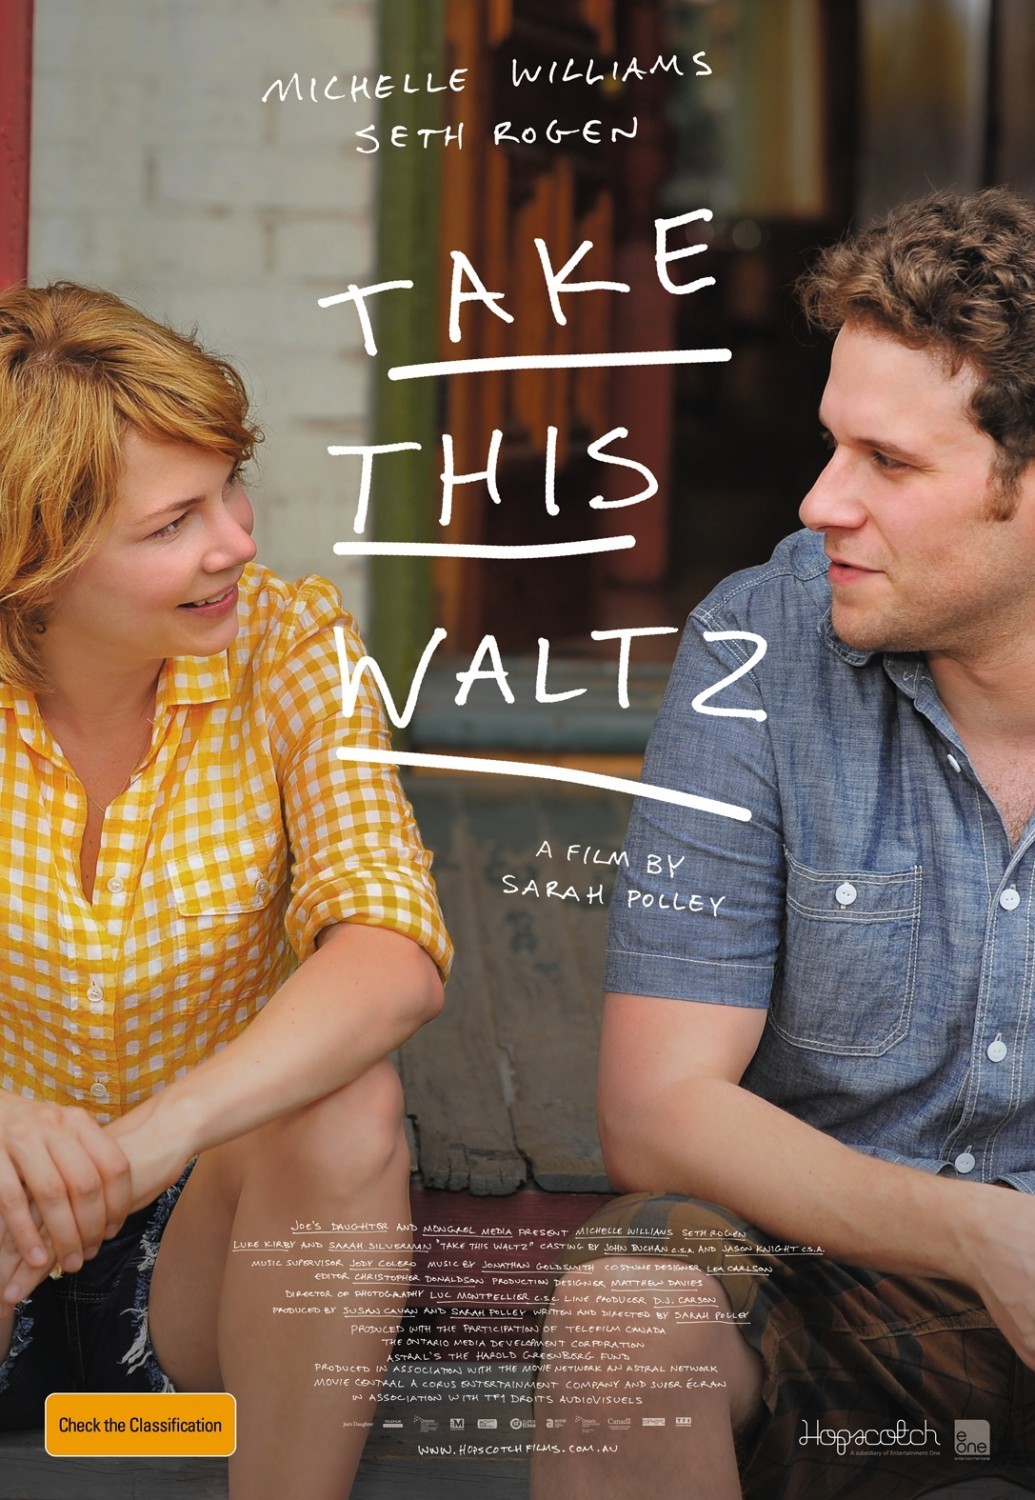 Poster of Magnolia Pictures' Take This Waltz (2012)